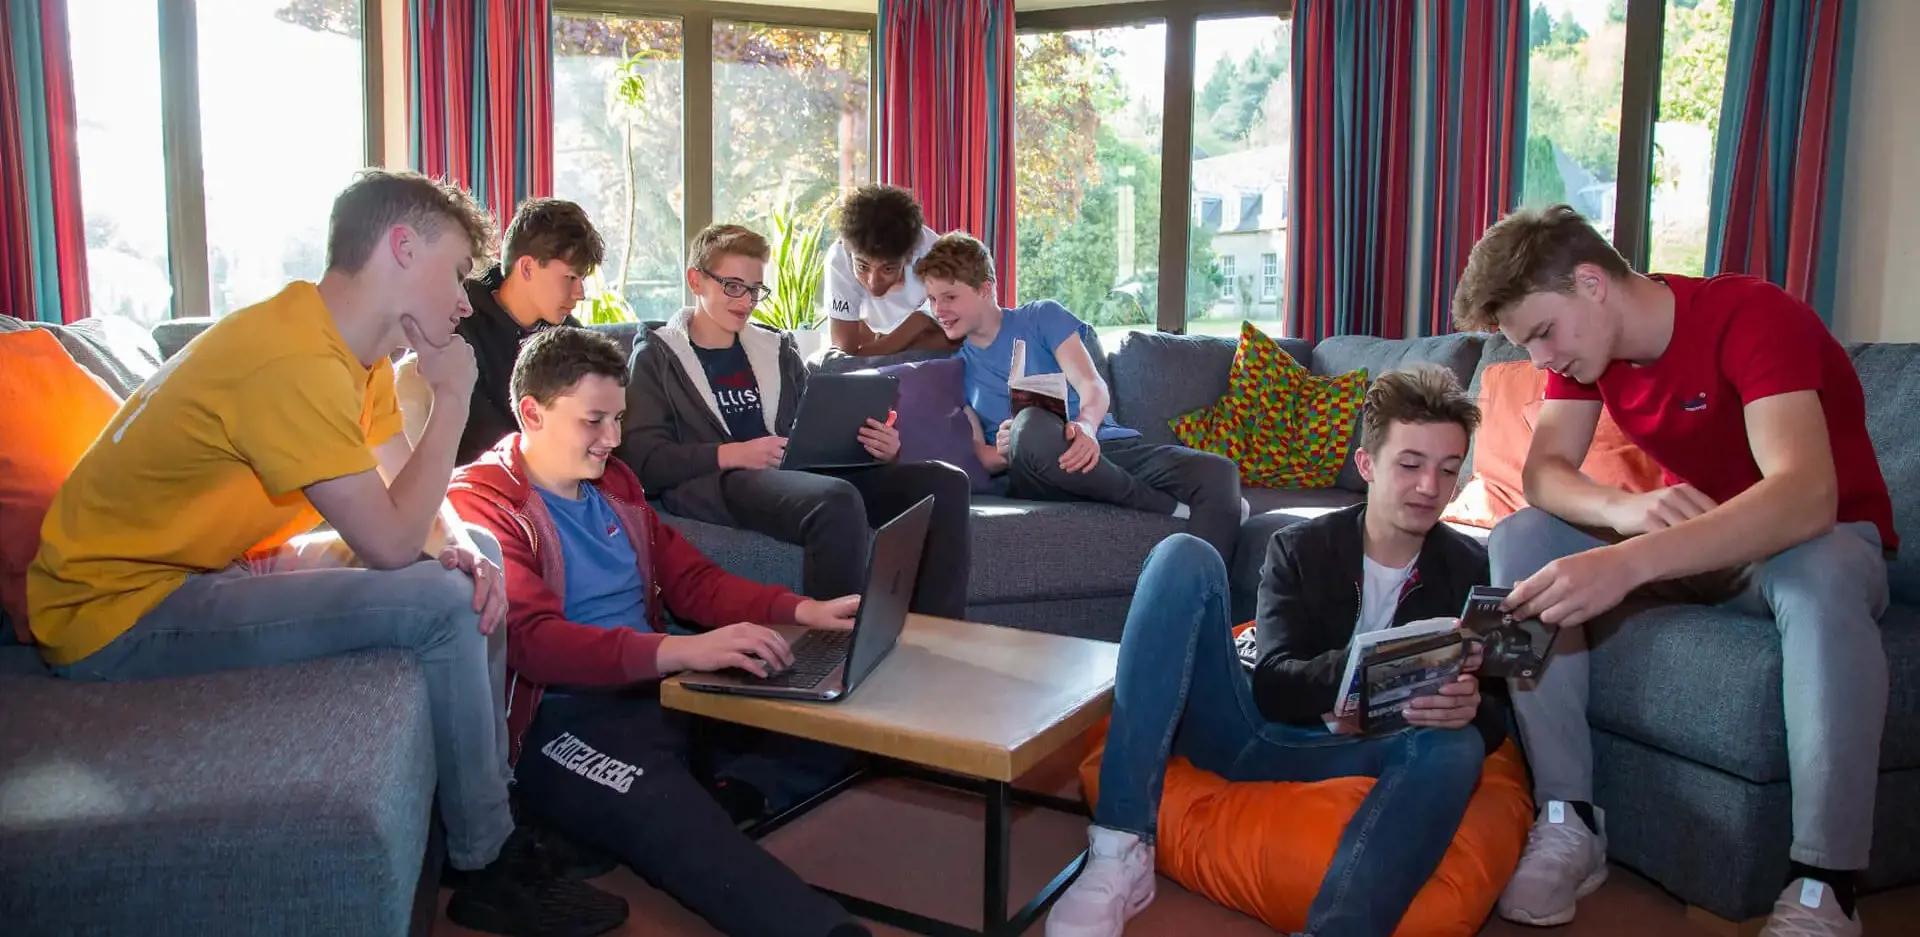 We have compiled a Step-by-Step Guide to Boarding Schools, here we delve into boarding school accommodation.